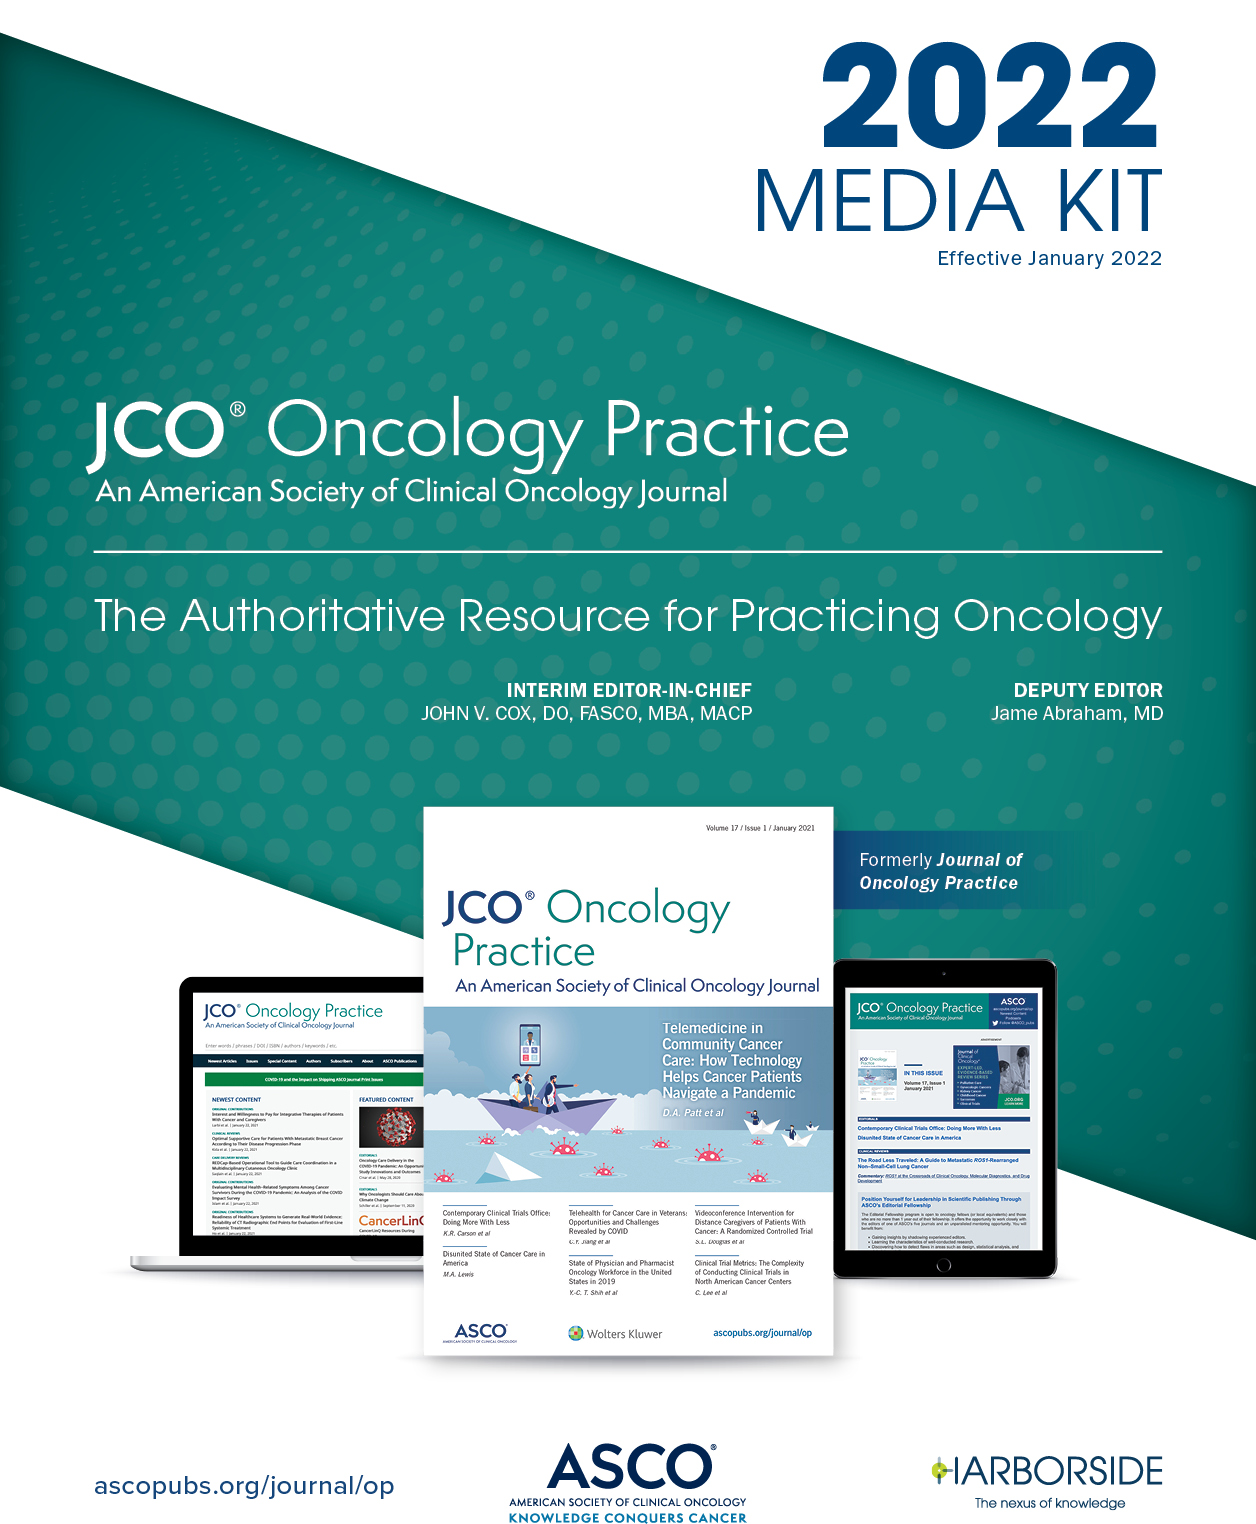 JCO Oncology Practice Rate Card Image